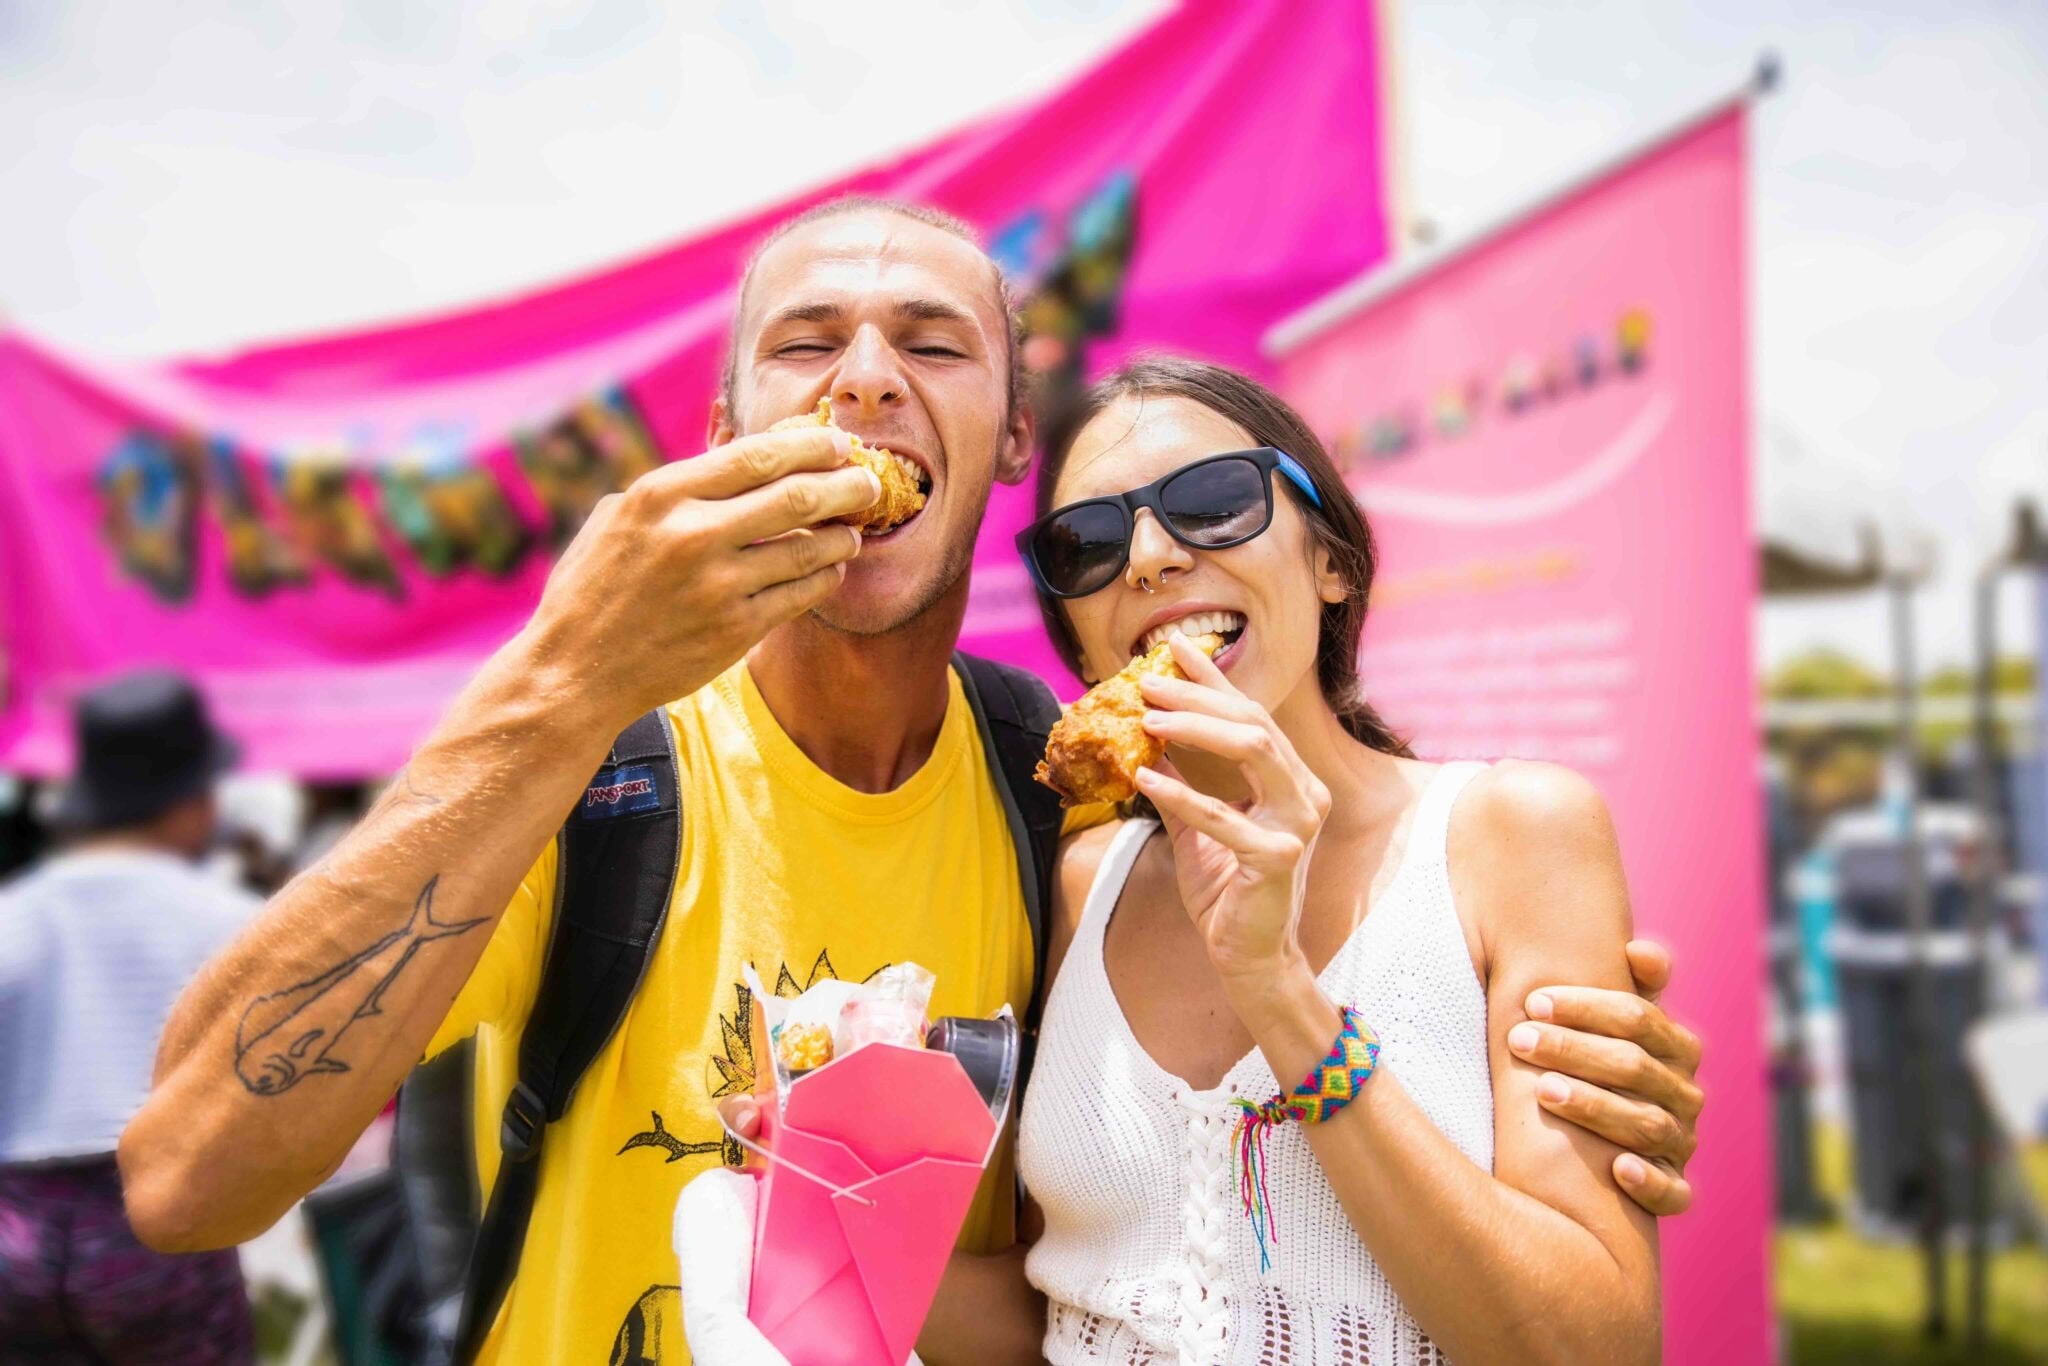 A huge vegan festival is coming to London this summer